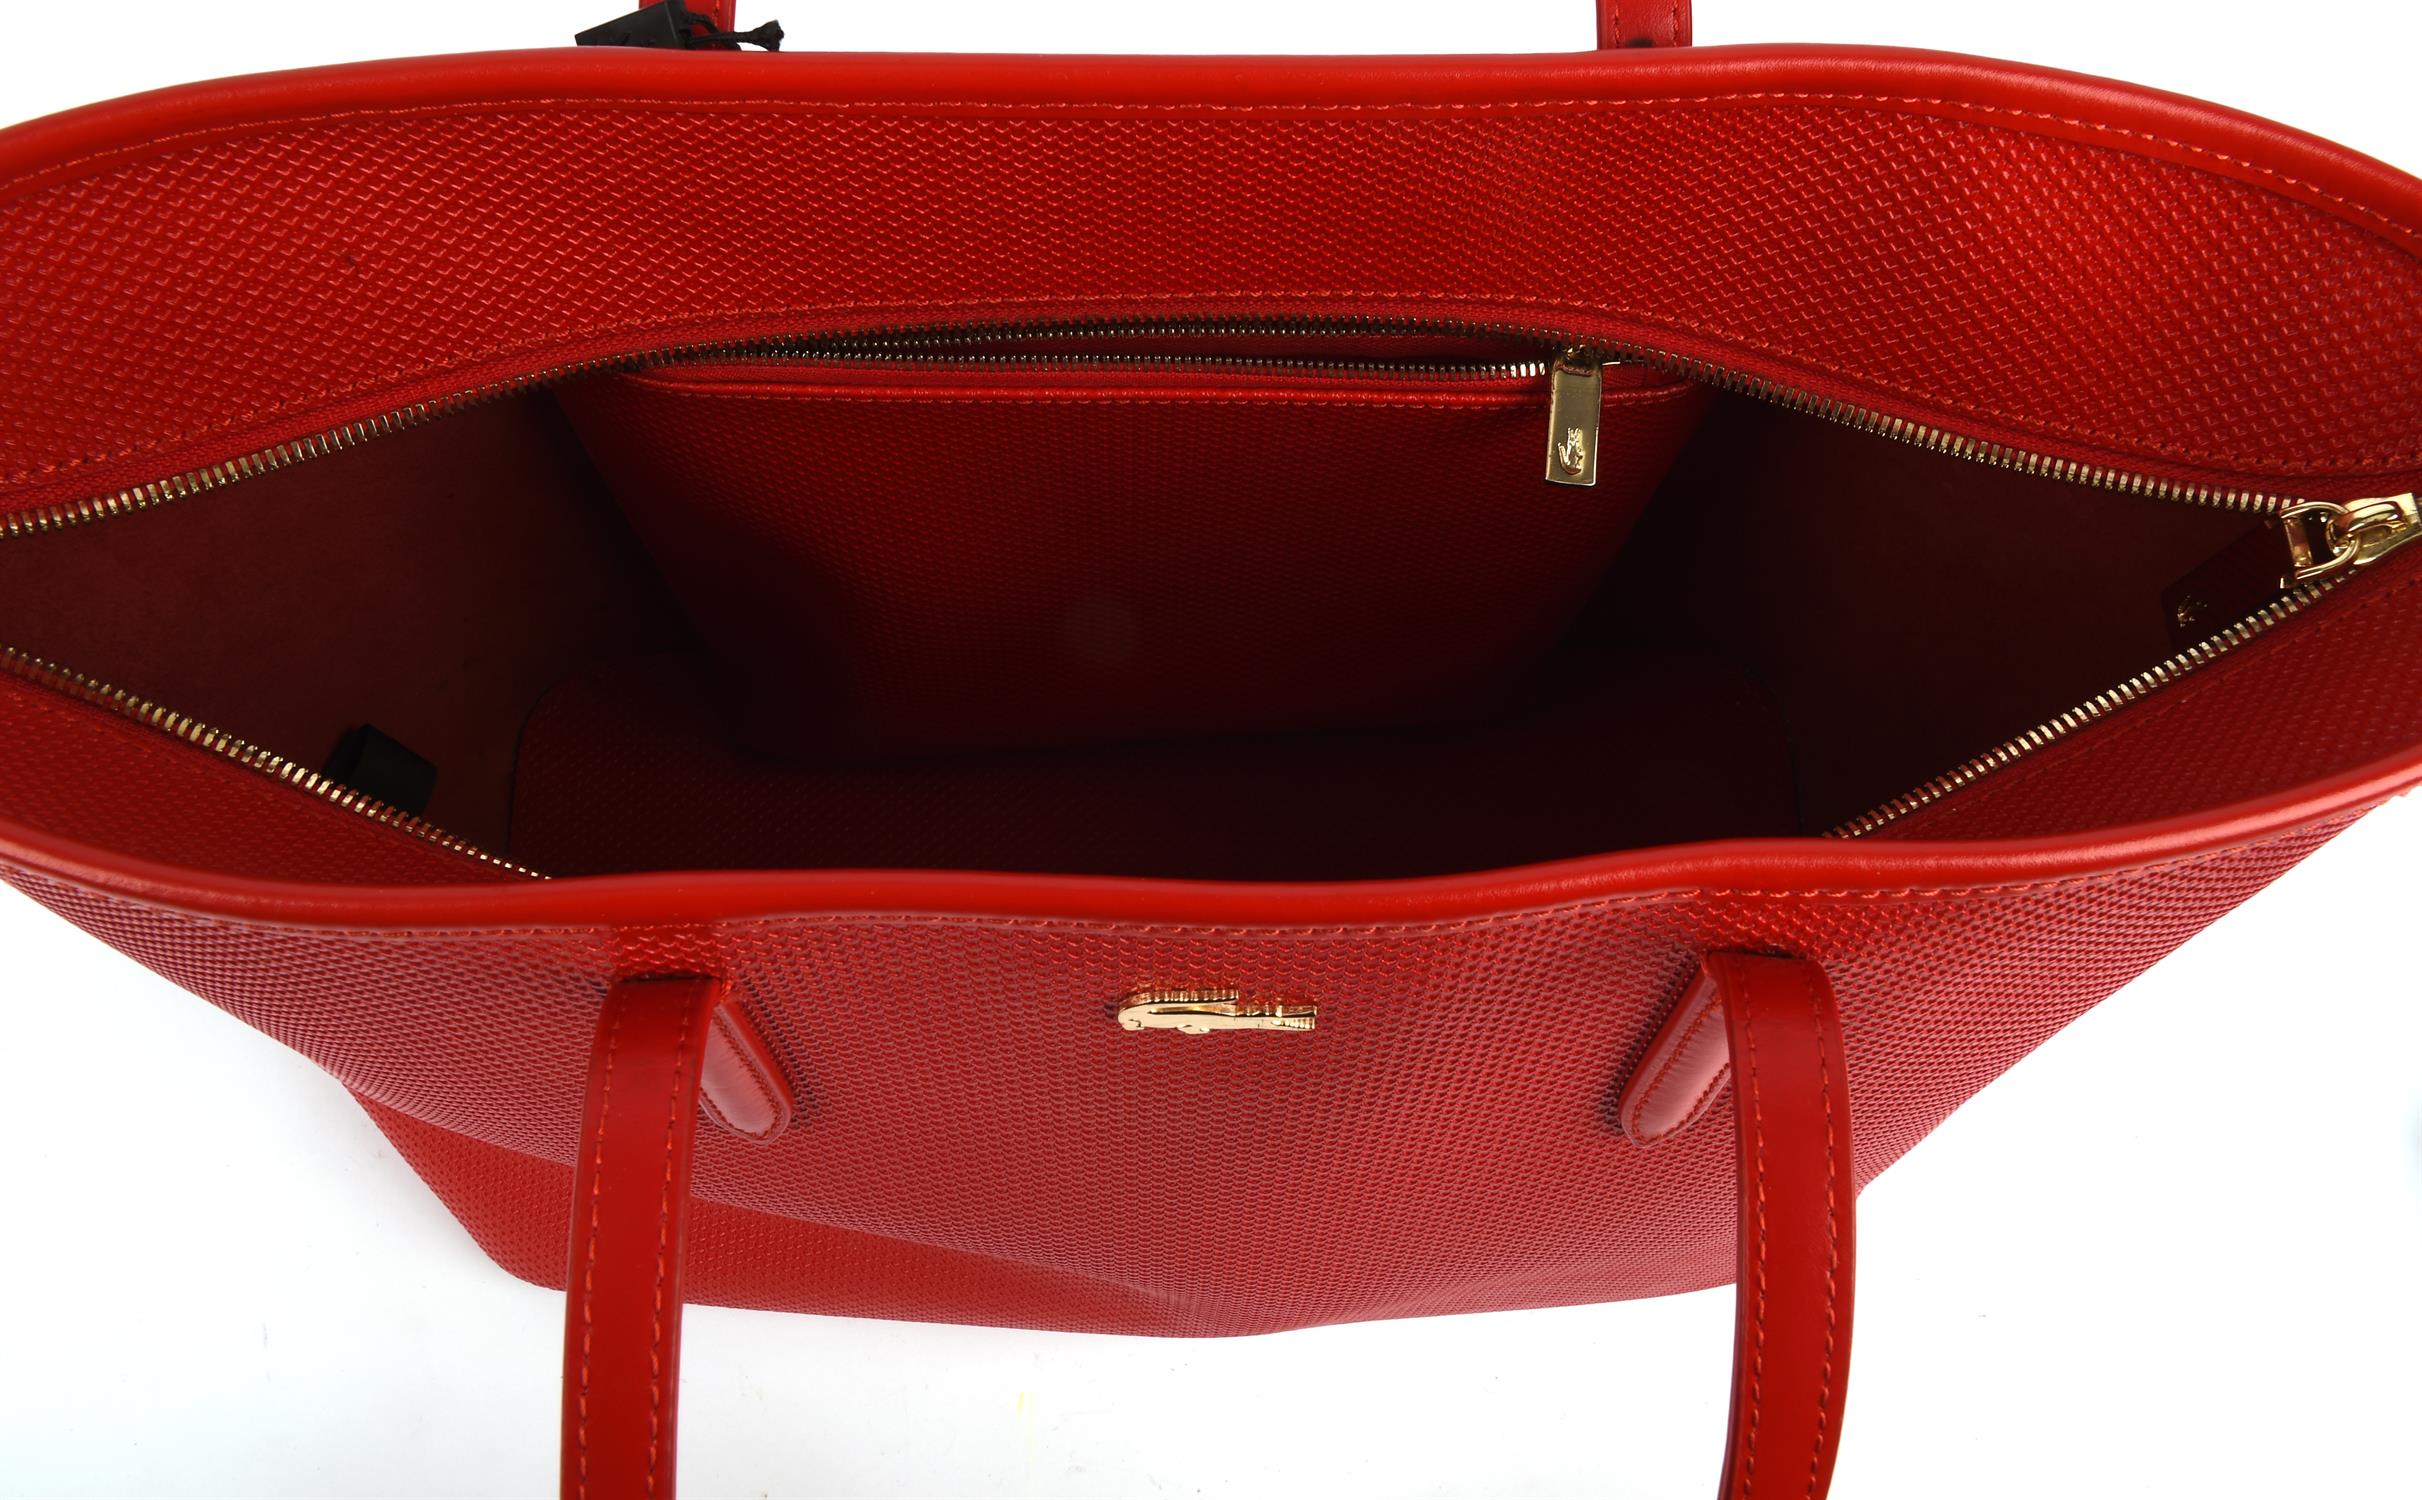 LACOSTE zipped "High Risk Red" split leather tote shopping bag (29cm x 29cm x 6cm) - Image 5 of 6